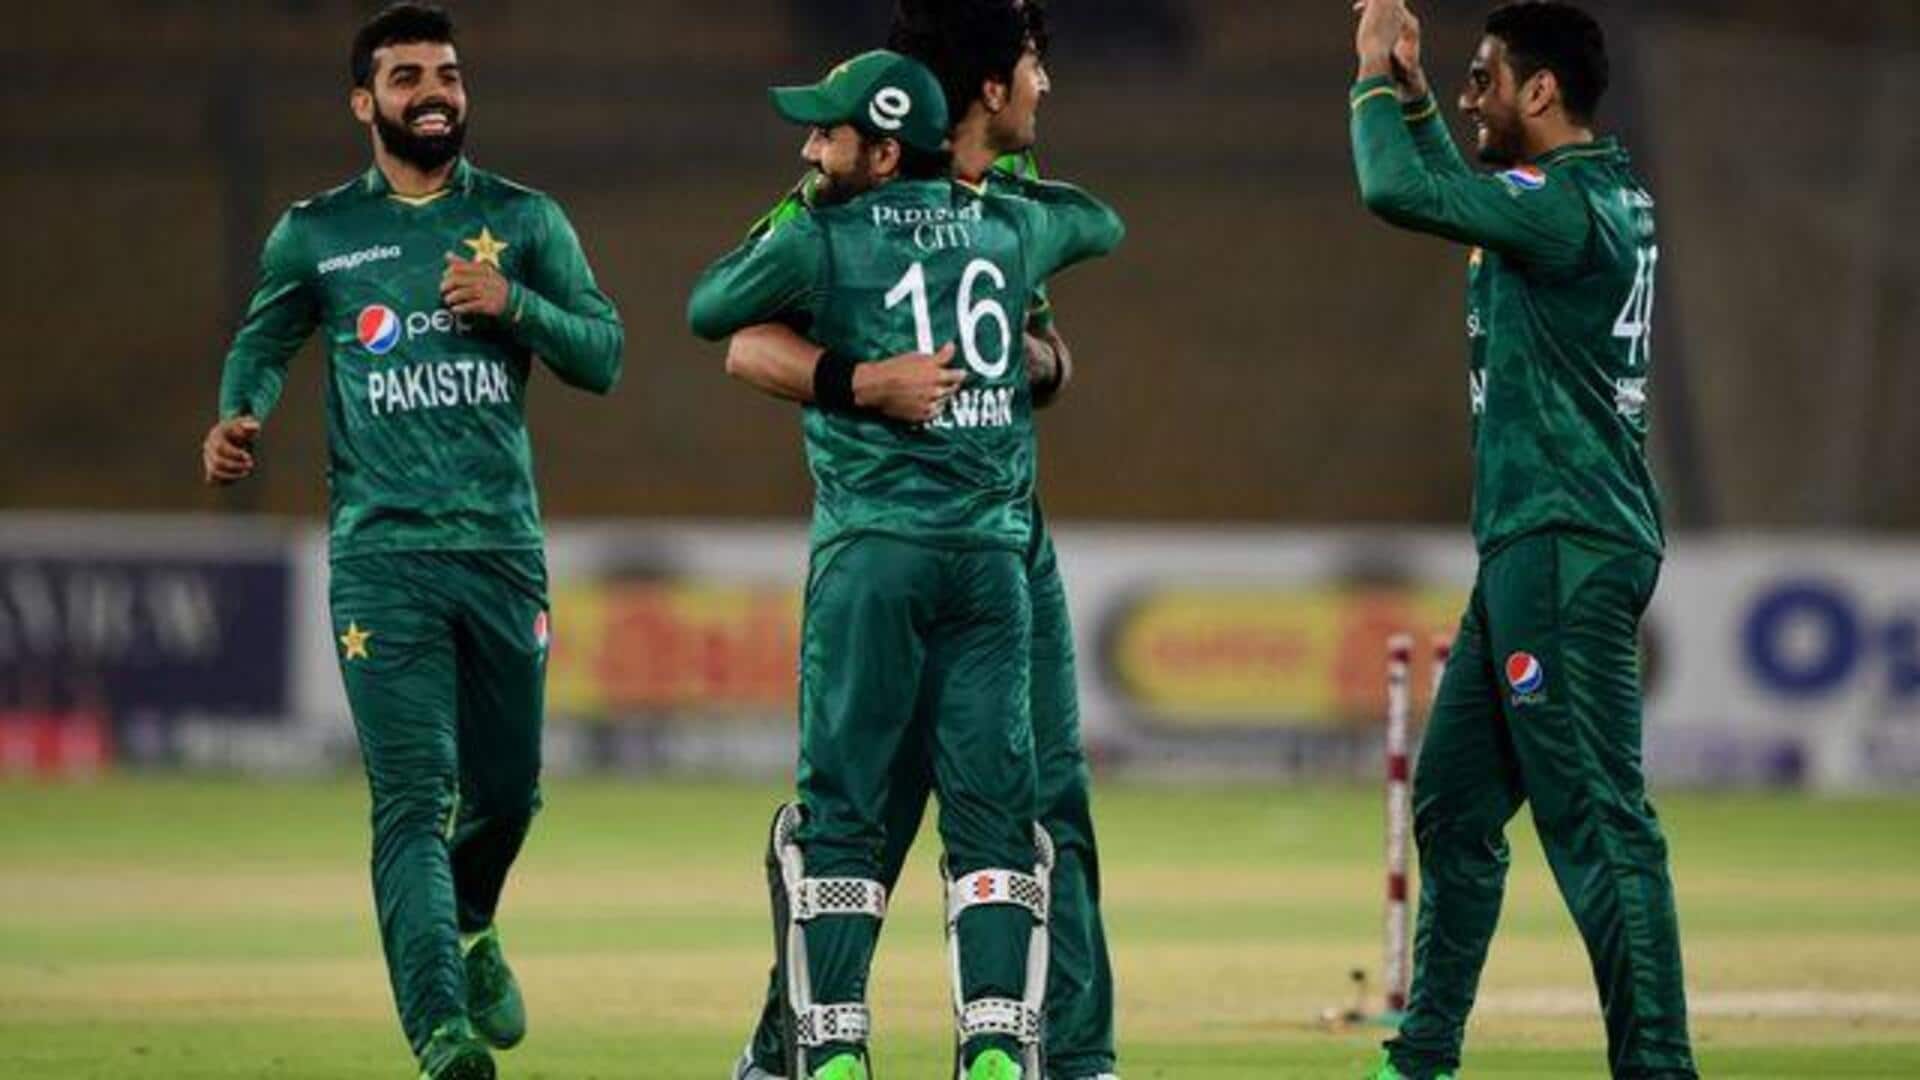 ICC Cricket World Cup, Pakistan vs South Africa: Statistical preview